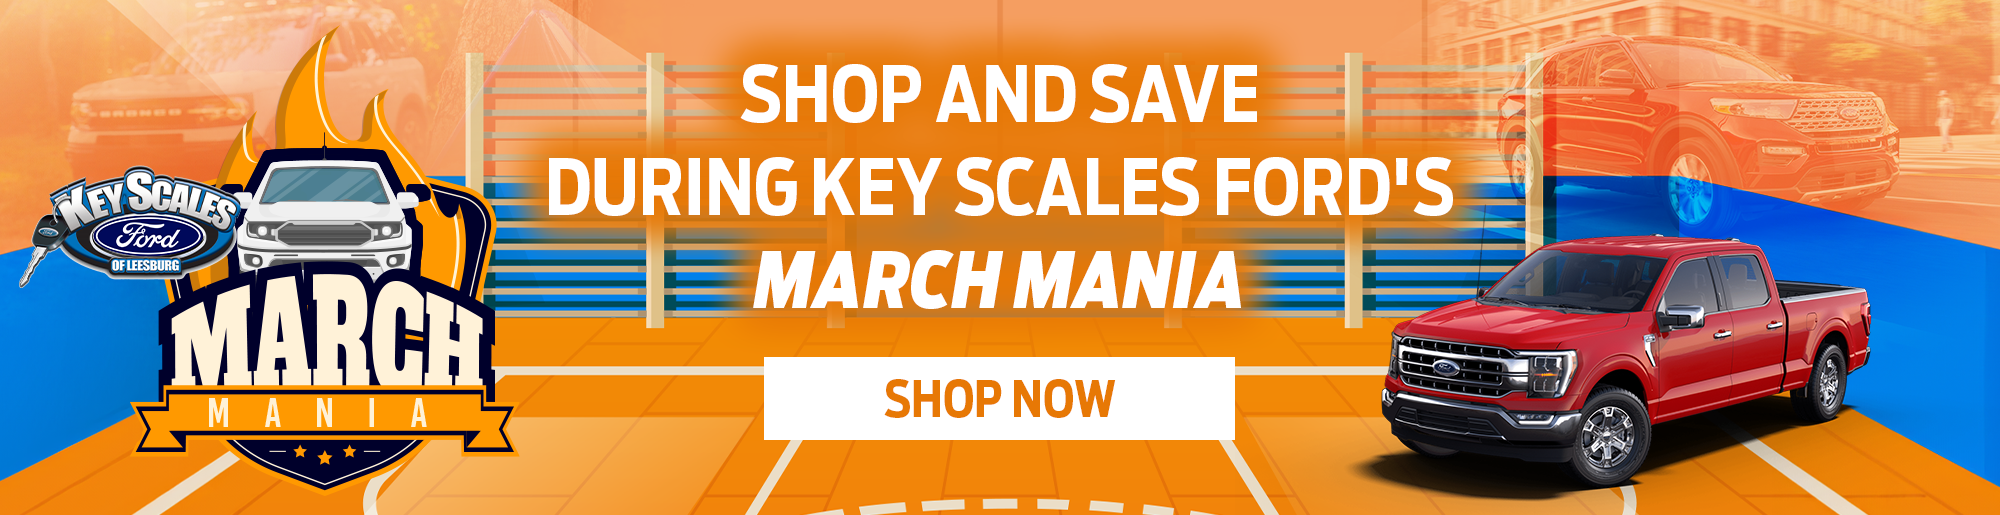 Shop and Save during Key Scales Ford's March Mania